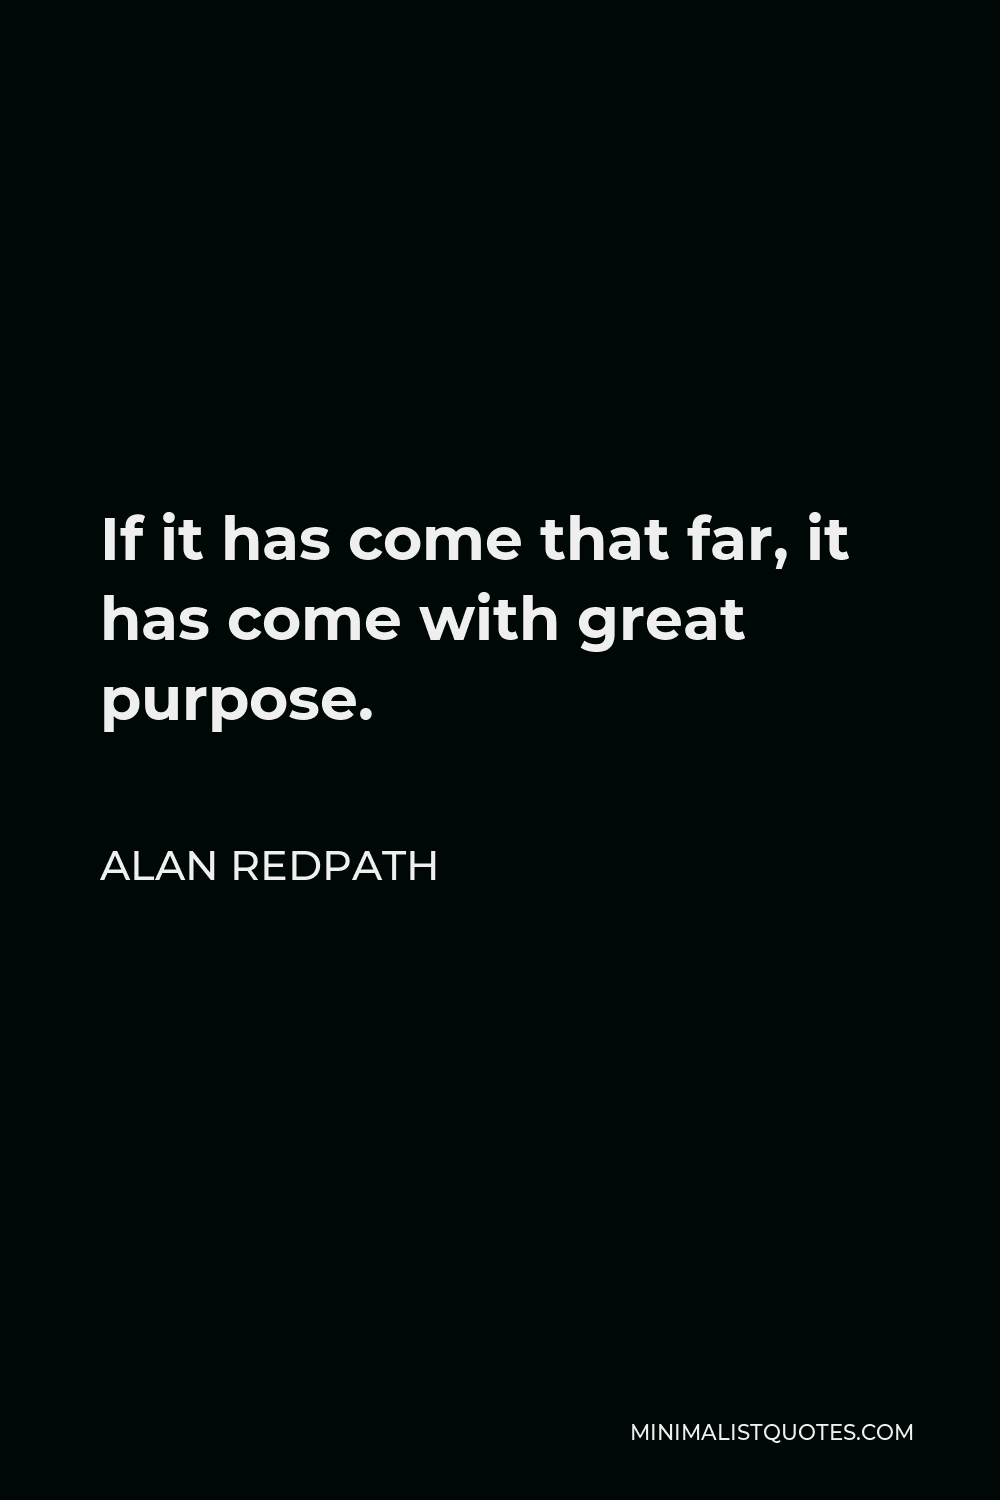 Alan Redpath Quote - If it has come that far, it has come with great purpose.